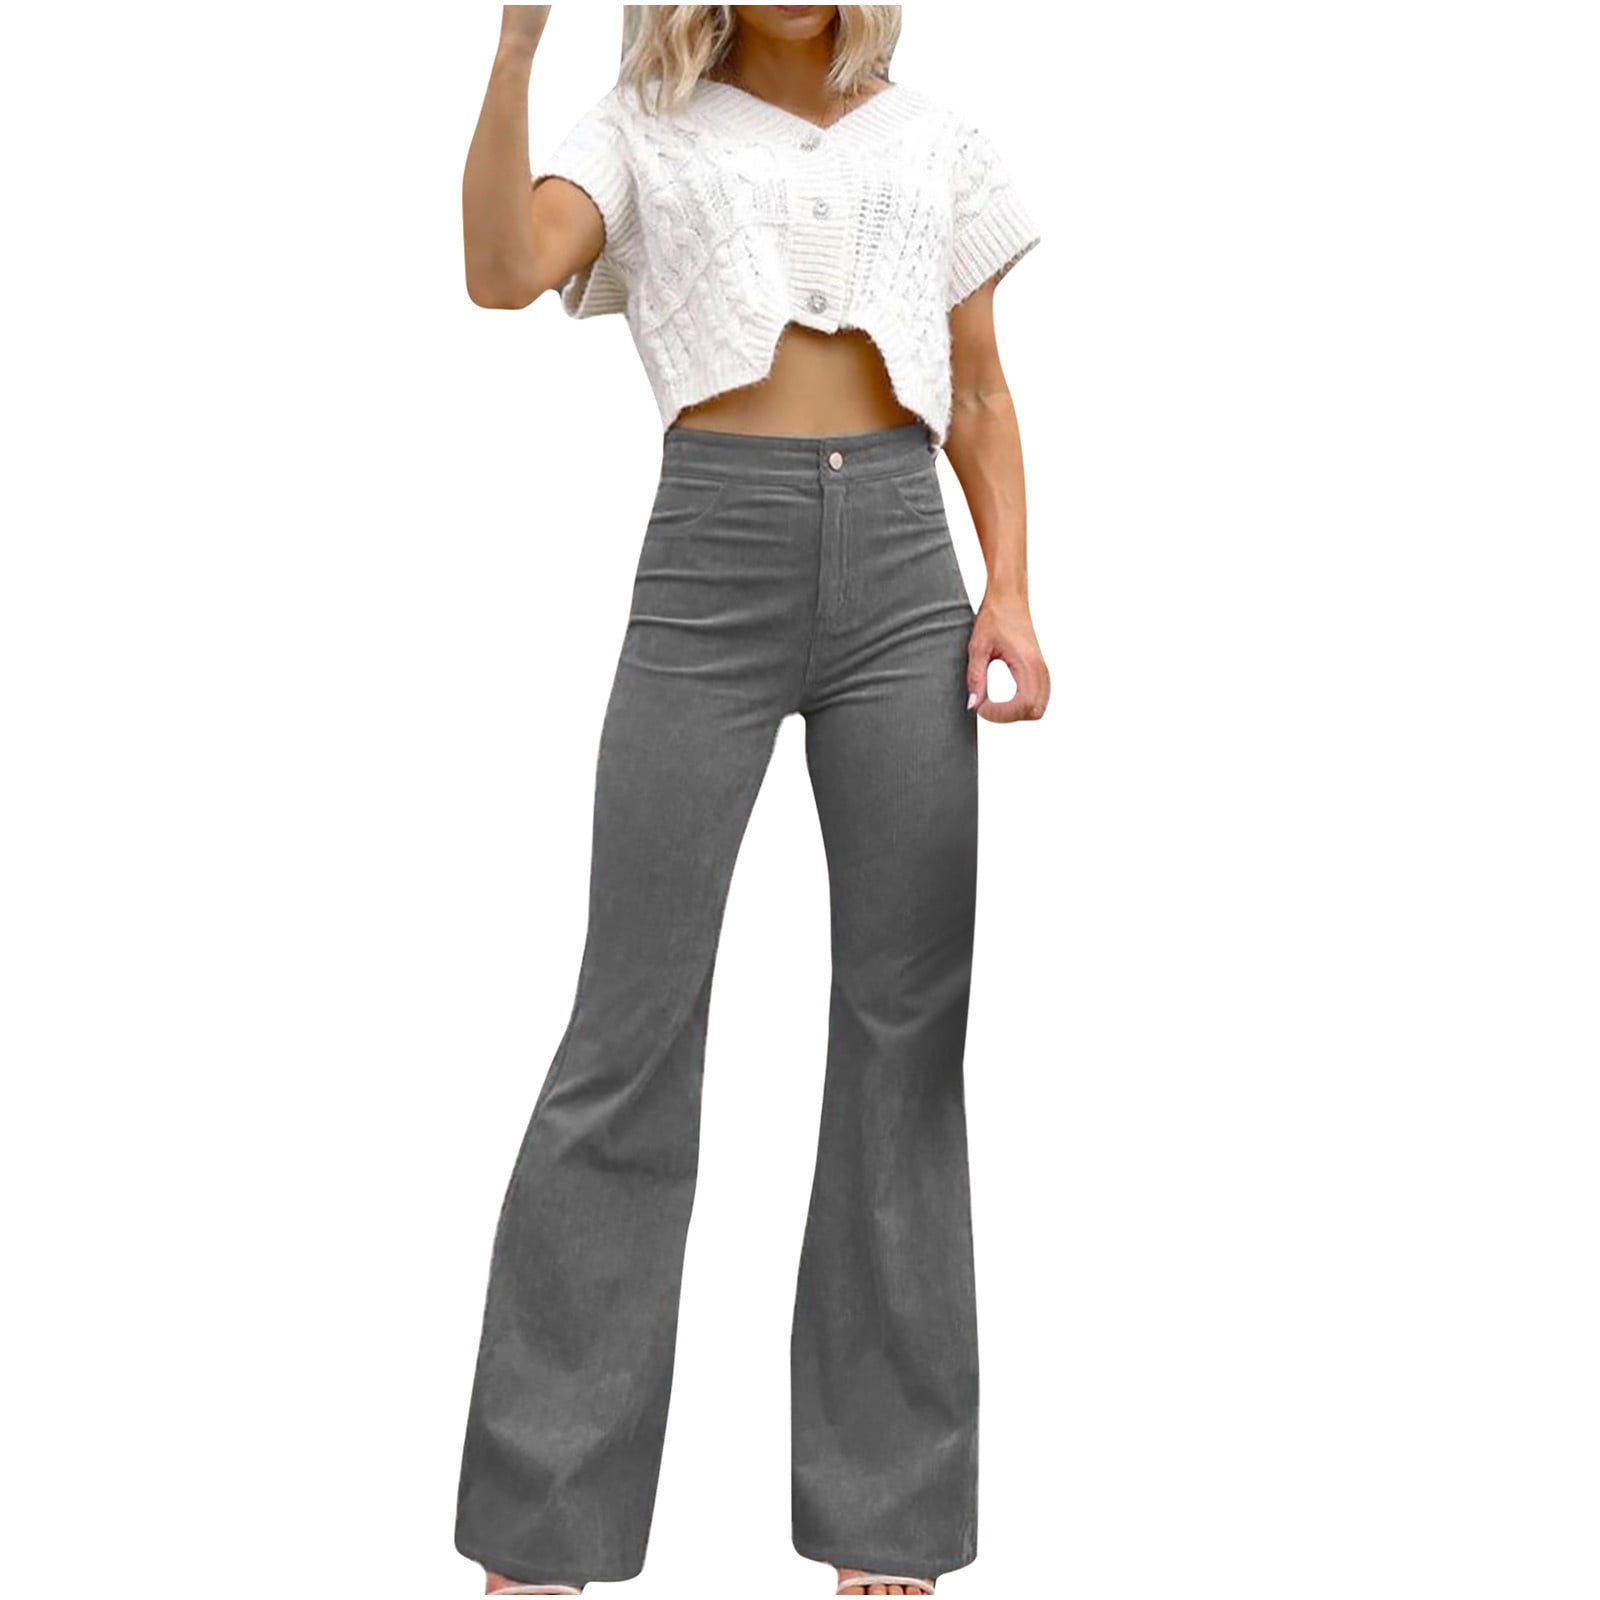 Bigersell Stretch Pant for Women Full Length Women's Fashion Slim Fit  Comfortable Solid Color Pocket Casual Flared Pants Flare Overall Jeans for  Ladies 